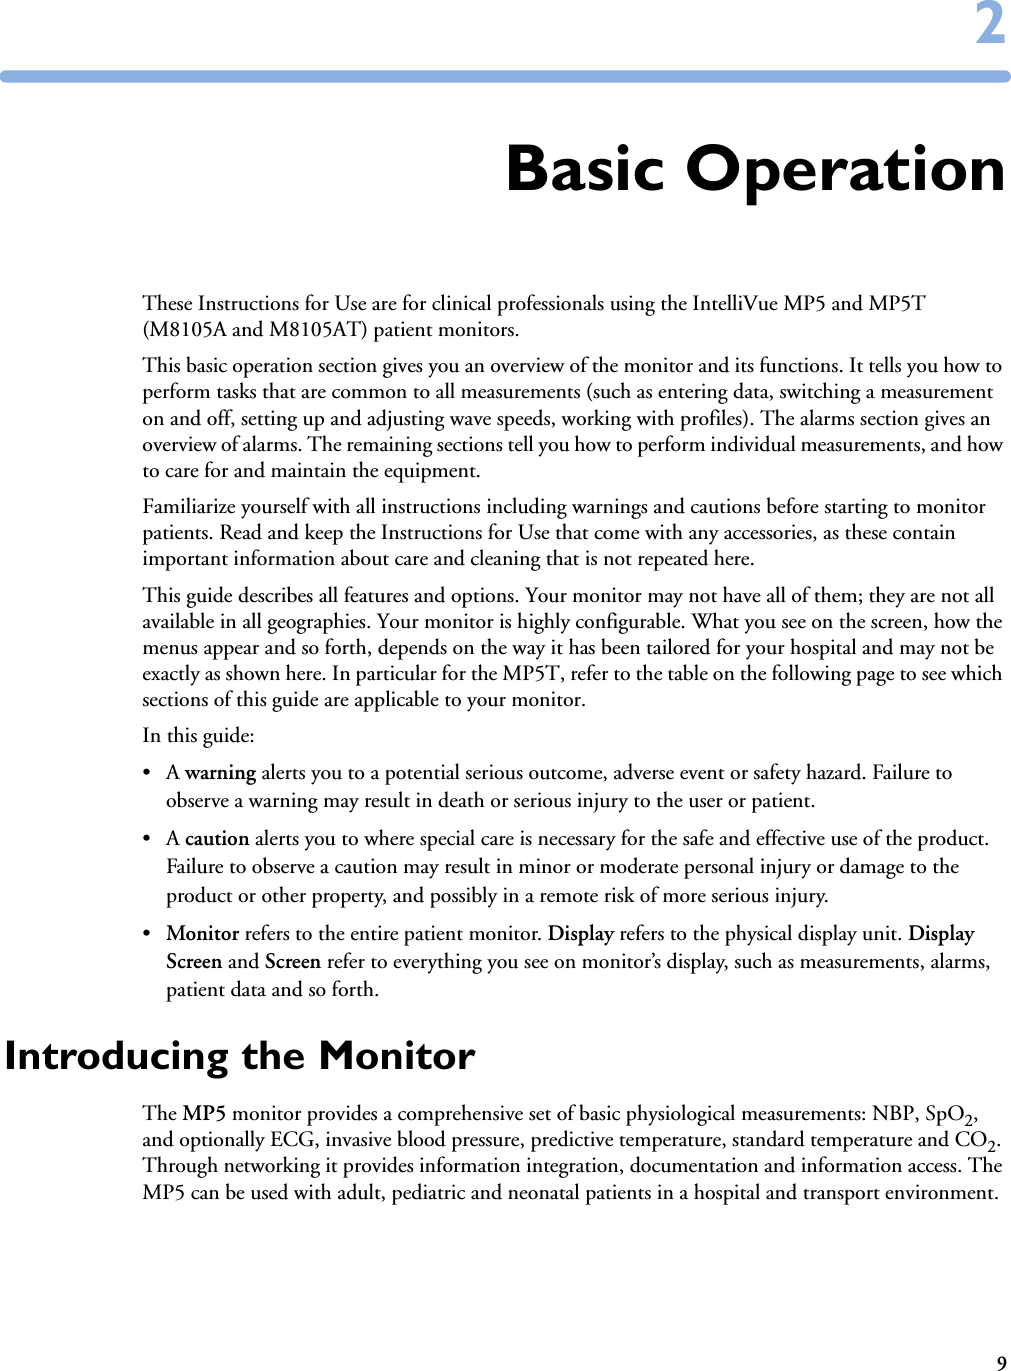 922Basic OperationThese Instructions for Use are for clinical professionals using the IntelliVue MP5 and MP5T (M8105A and M8105AT) patient monitors. This basic operation section gives you an overview of the monitor and its functions. It tells you how to perform tasks that are common to all measurements (such as entering data, switching a measurement on and off, setting up and adjusting wave speeds, working with profiles). The alarms section gives an overview of alarms. The remaining sections tell you how to perform individual measurements, and how to care for and maintain the equipment.Familiarize yourself with all instructions including warnings and cautions before starting to monitor patients. Read and keep the Instructions for Use that come with any accessories, as these contain important information about care and cleaning that is not repeated here.This guide describes all features and options. Your monitor may not have all of them; they are not all available in all geographies. Your monitor is highly configurable. What you see on the screen, how the menus appear and so forth, depends on the way it has been tailored for your hospital and may not be exactly as shown here. In particular for the MP5T, refer to the table on the following page to see which sections of this guide are applicable to your monitor. In this guide:•A warning alerts you to a potential serious outcome, adverse event or safety hazard. Failure to observe a warning may result in death or serious injury to the user or patient.•A caution alerts you to where special care is necessary for the safe and effective use of the product. Failure to observe a caution may result in minor or moderate personal injury or damage to the product or other property, and possibly in a remote risk of more serious injury.•Monitor refers to the entire patient monitor. Display refers to the physical display unit. Display Screen and Screen refer to everything you see on monitor’s display, such as measurements, alarms, patient data and so forth.Introducing the MonitorThe MP5 monitor provides a comprehensive set of basic physiological measurements: NBP, SpO2, and optionally ECG, invasive blood pressure, predictive temperature, standard temperature and CO2. Through networking it provides information integration, documentation and information access. The MP5 can be used with adult, pediatric and neonatal patients in a hospital and transport environment.